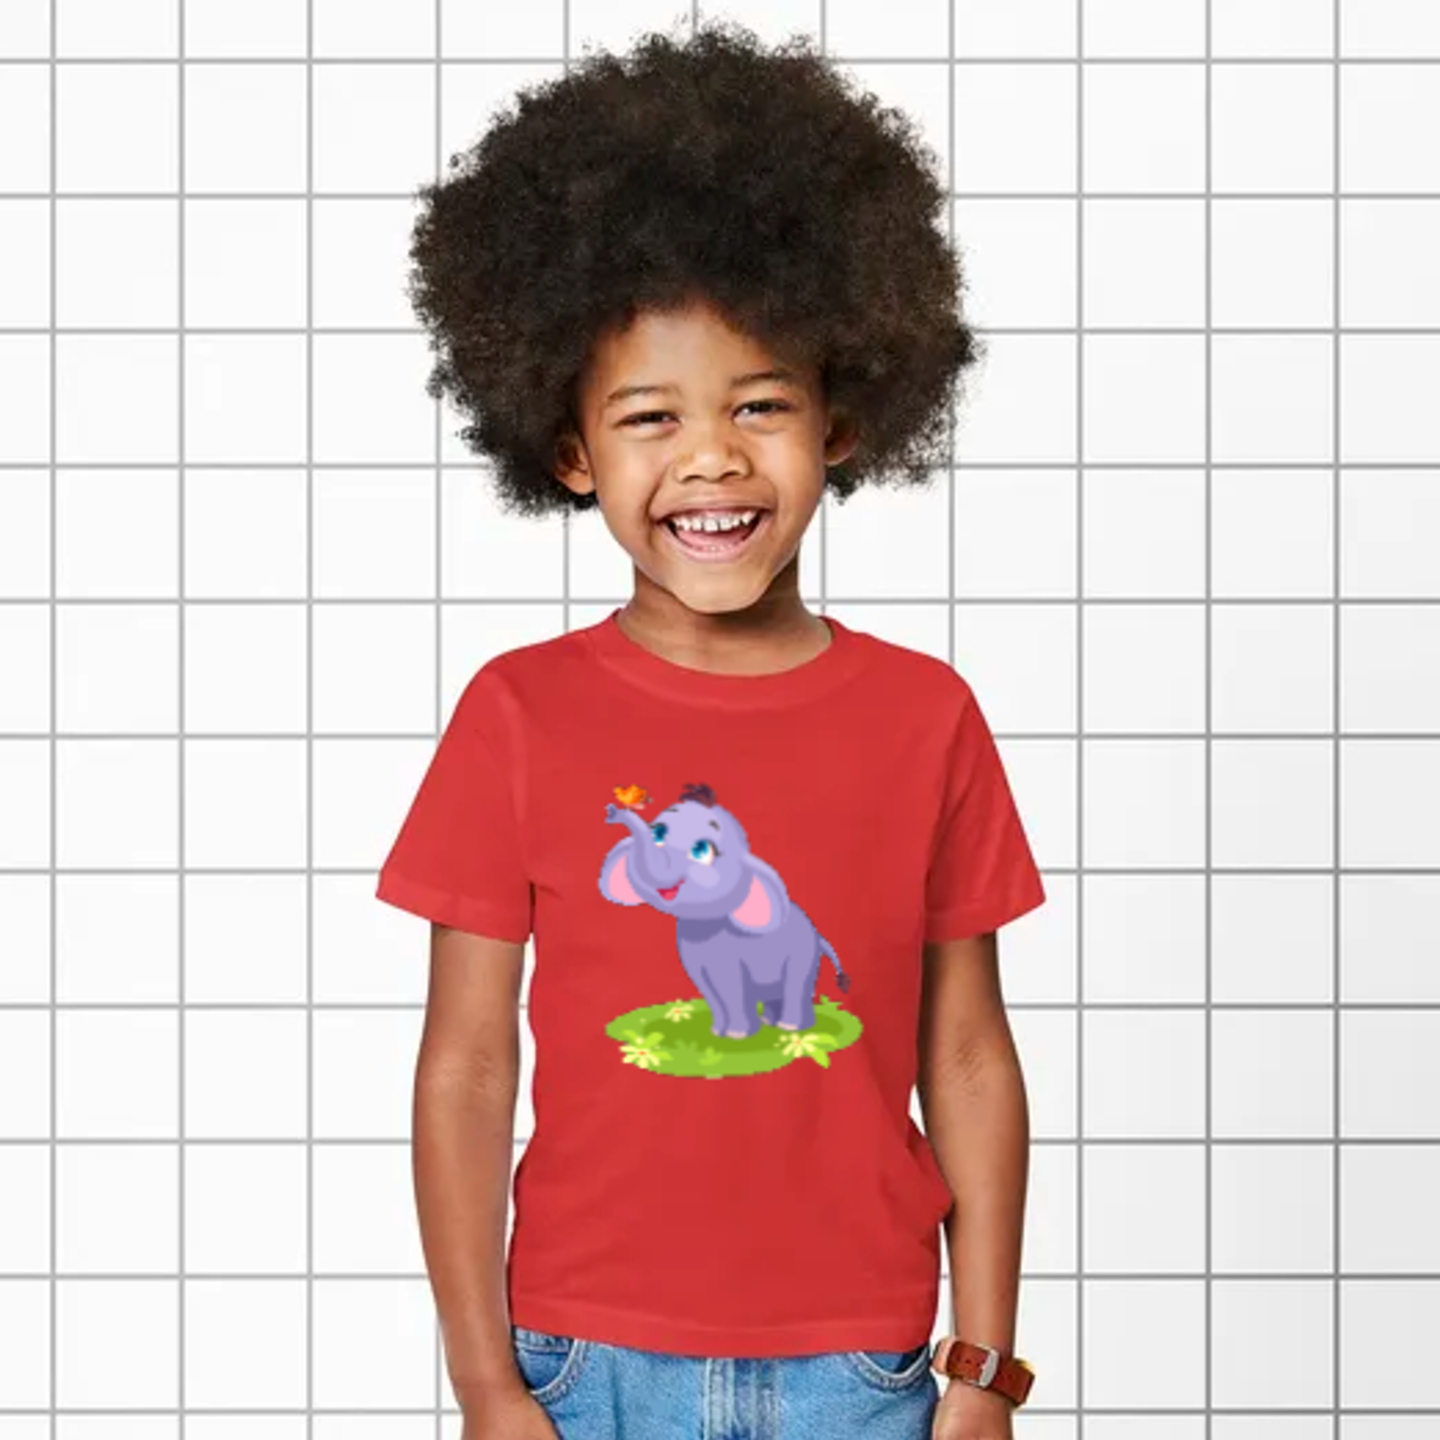 Cute Elephant Printed T-Shirts For Girls